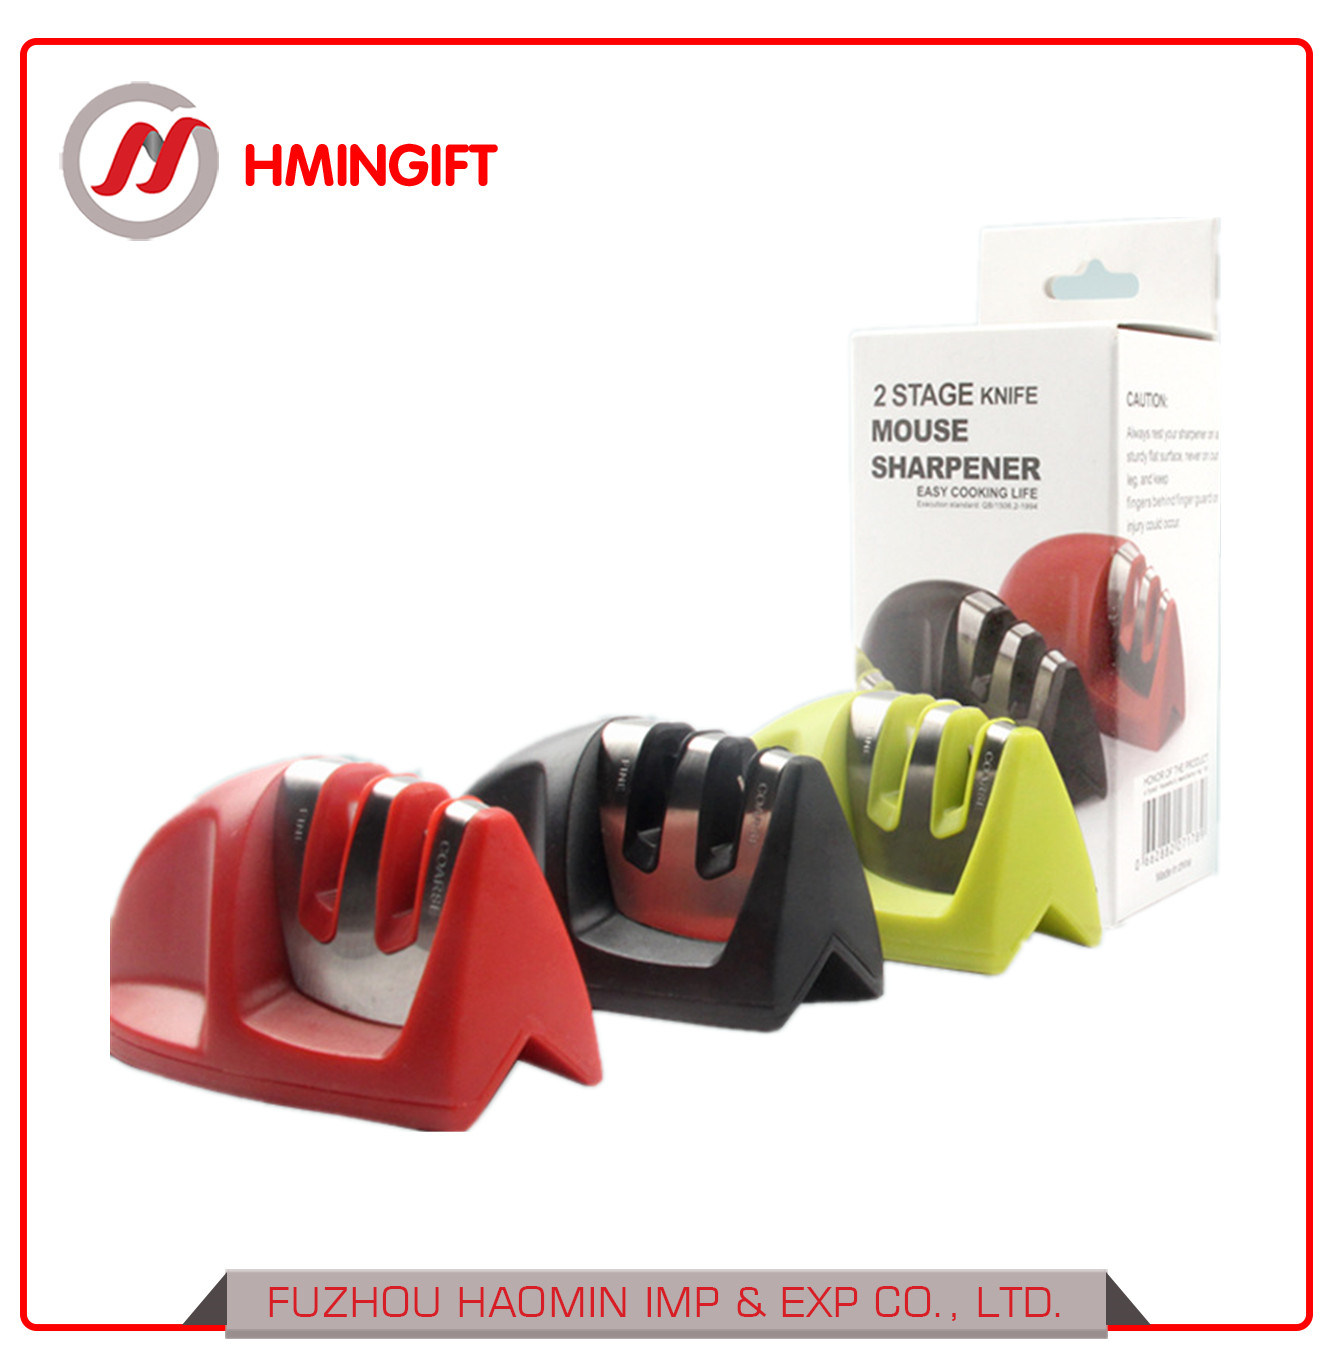 Two Stage Knife Mouse Sharpener for Cutting Tools, Knives Sharpener, Scissor Sharpening Tools